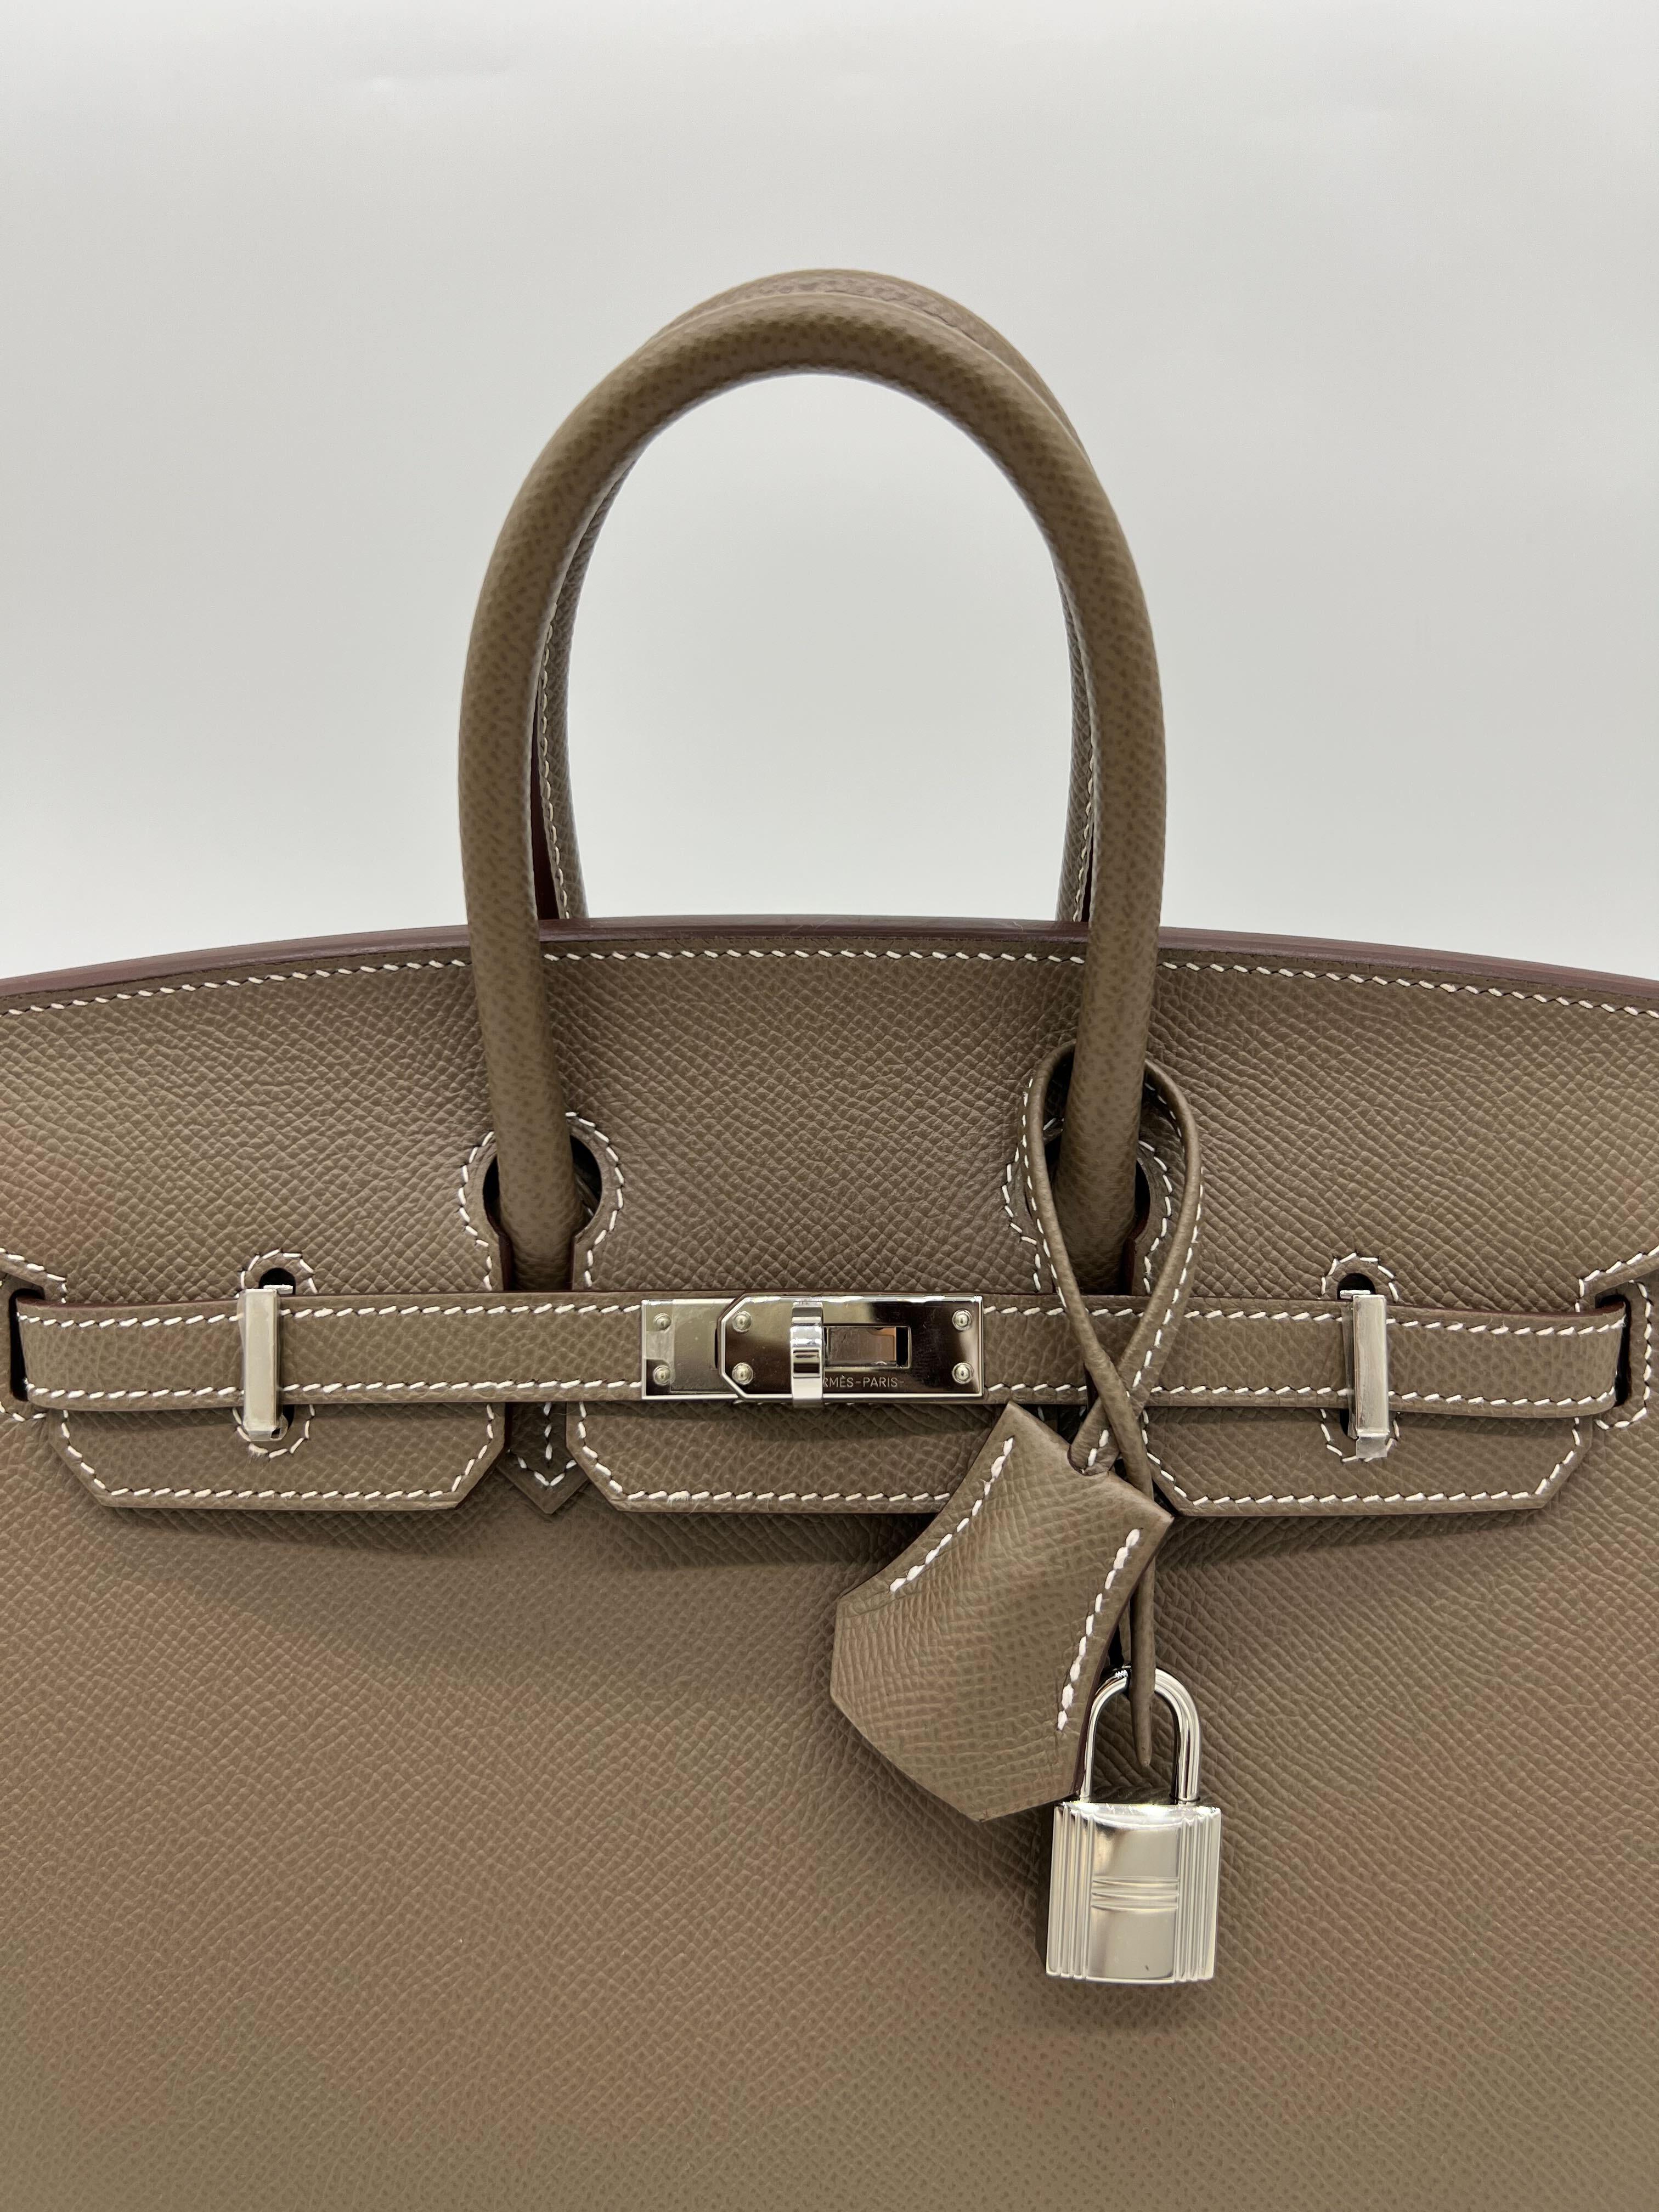 Hermès Birkin 25 Etoupe Epsom Leather Palladium Hardware

Condition & Year: Pre-owned (like new) 2022
Material: Epsom Leather
Measurements: 25cm x 20cm x 13cm
Hardware: Palladium

*Comes with full original packaging. Missing original receipt.